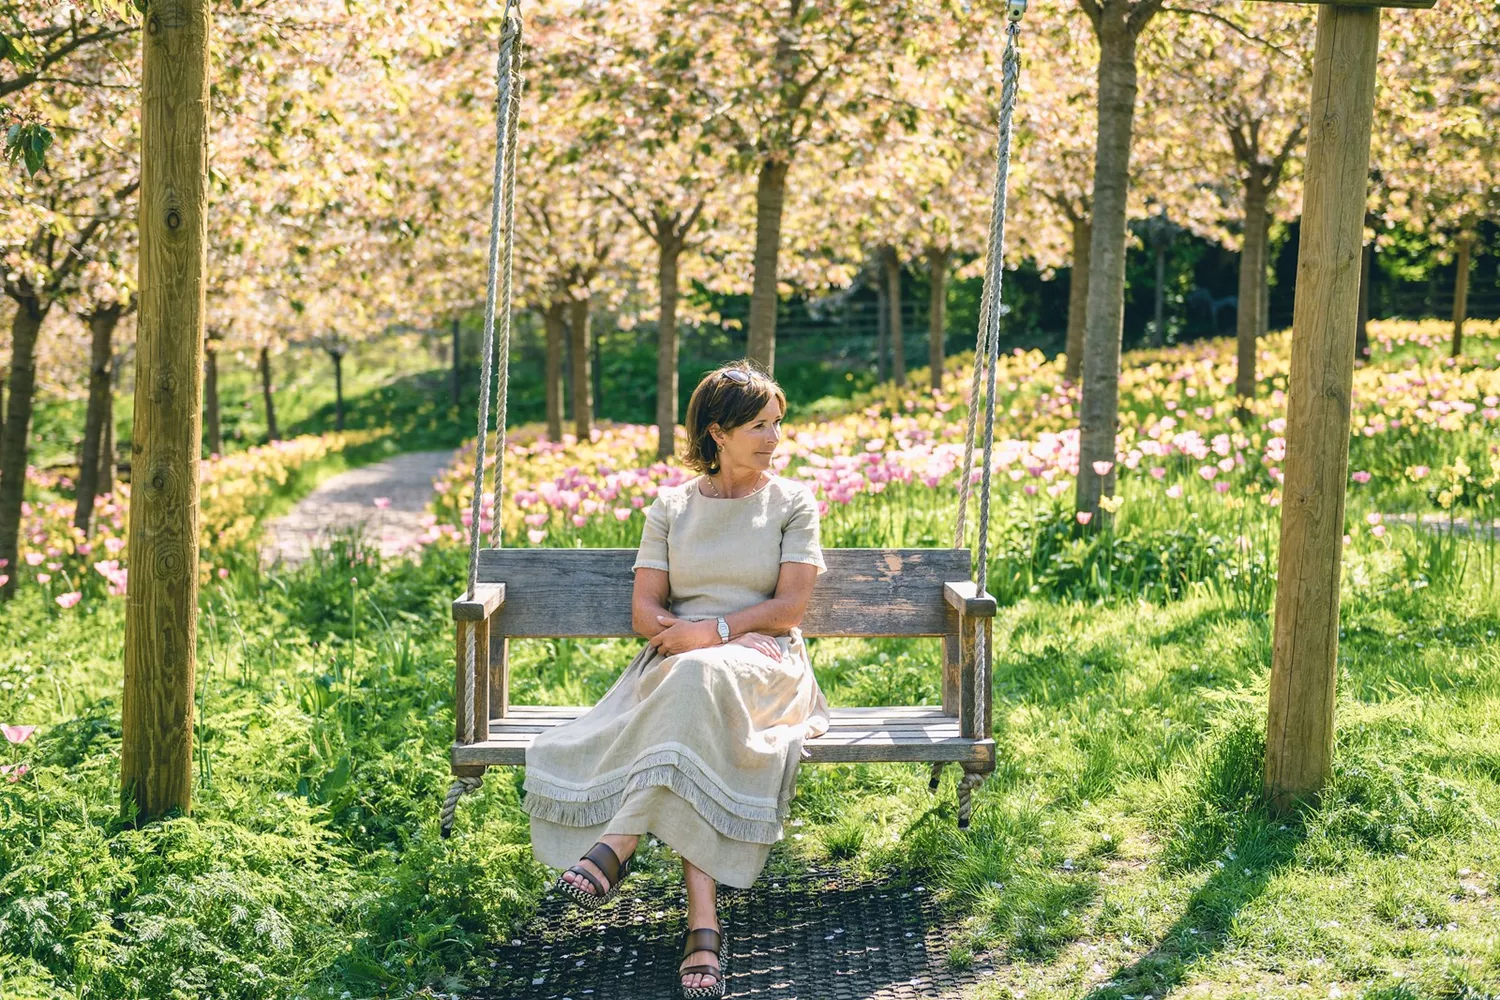 The Duchess of Northumberland on a swing seat in Alnwick gardens, Northumberland, England